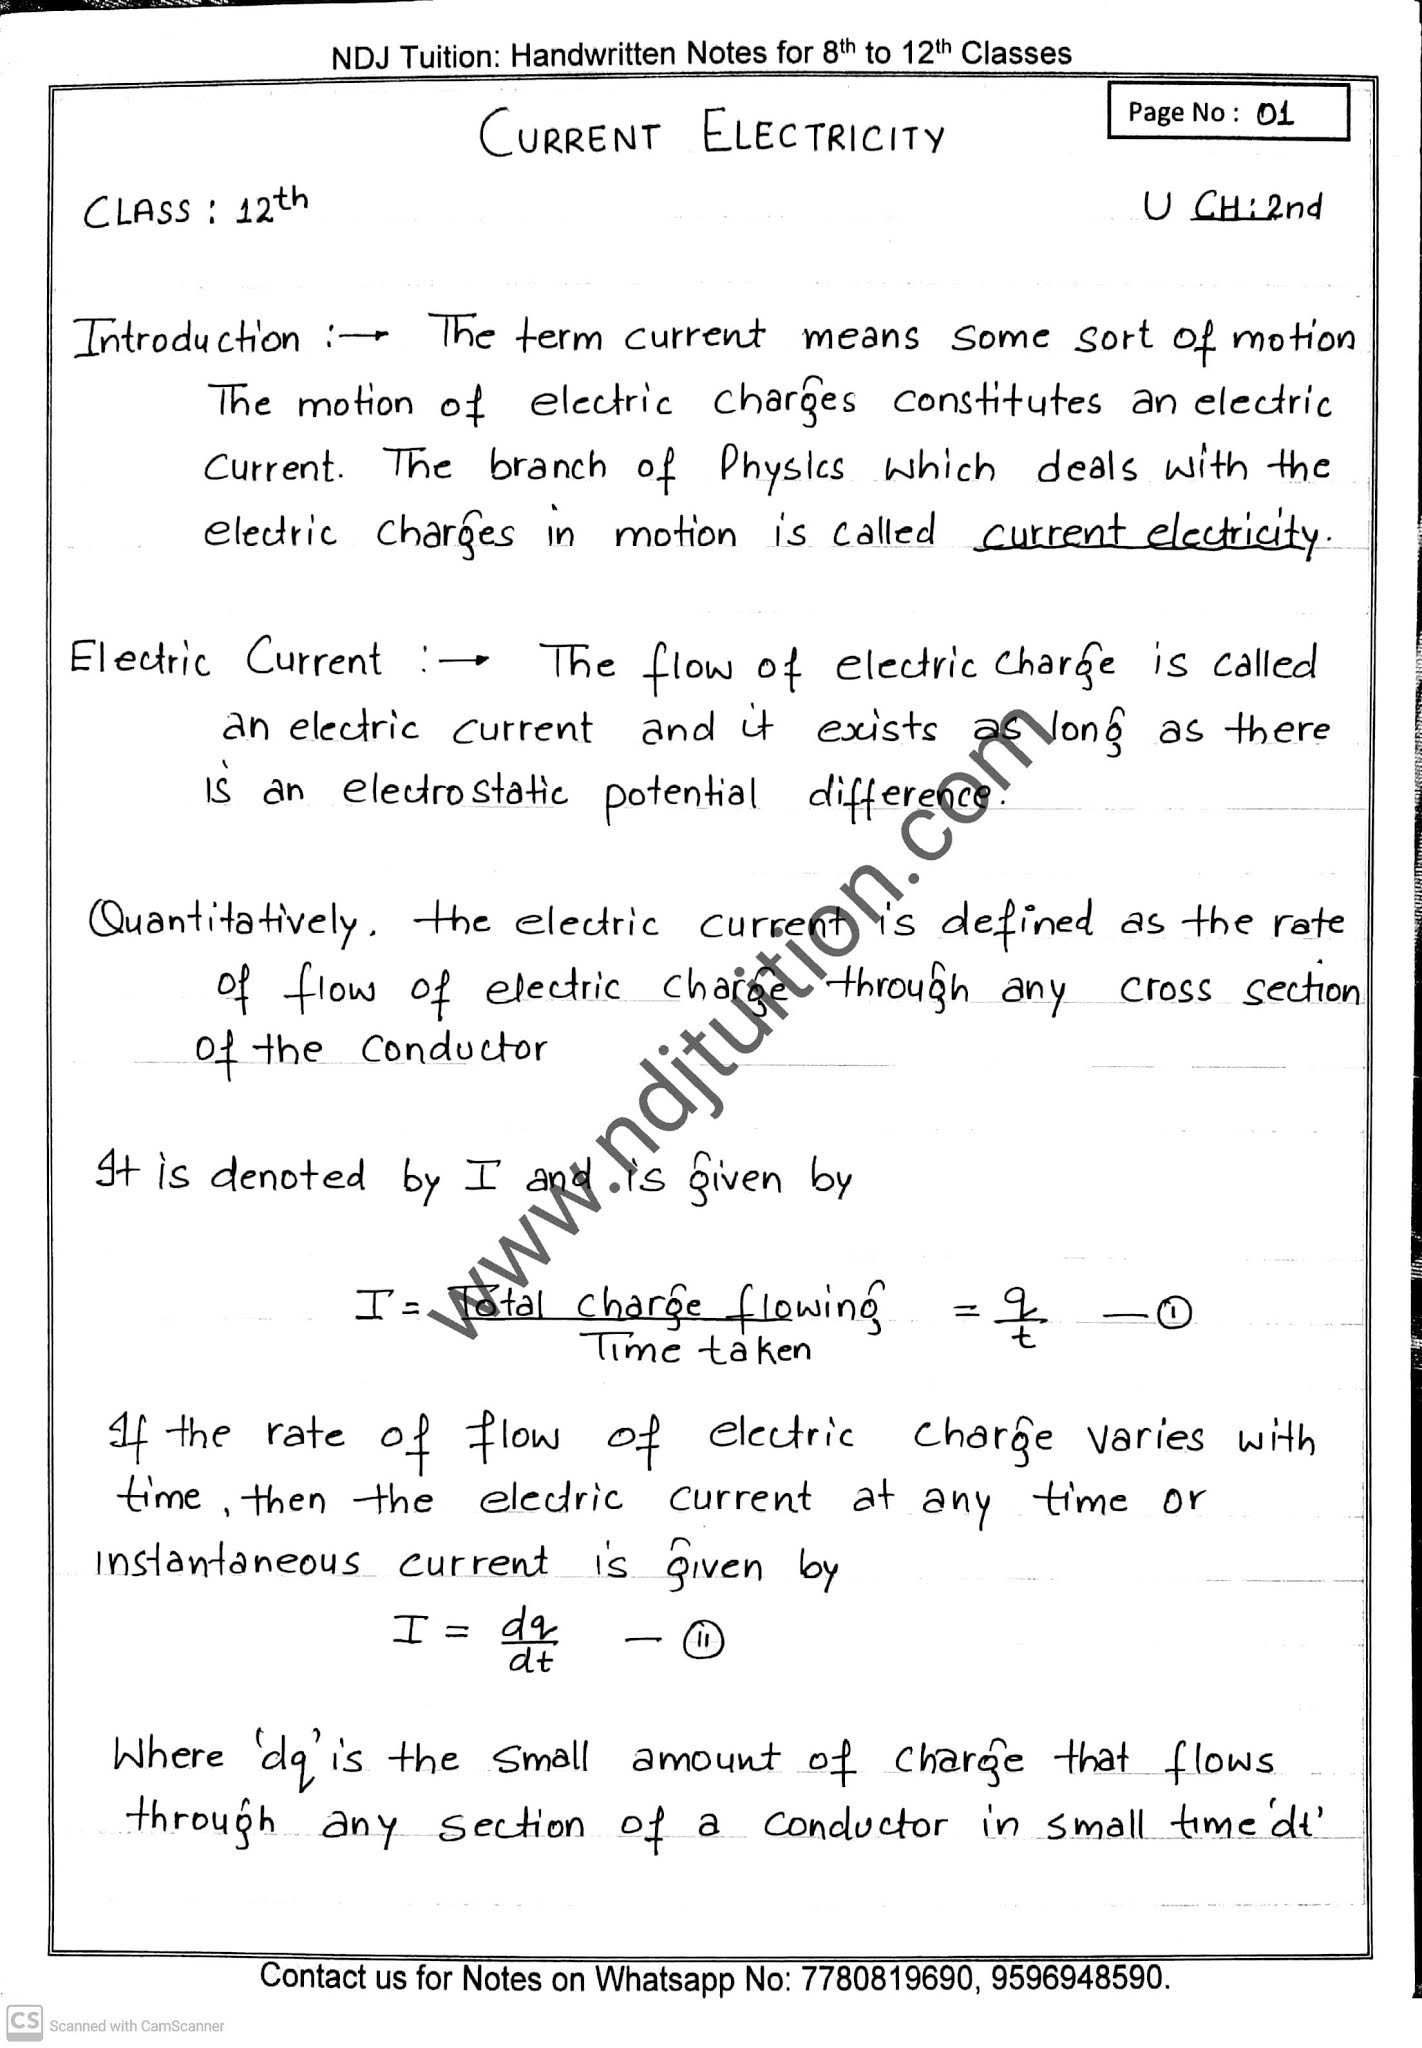 Current Electricity Class Th Handwritten Notes Cbse Ndj Tuition